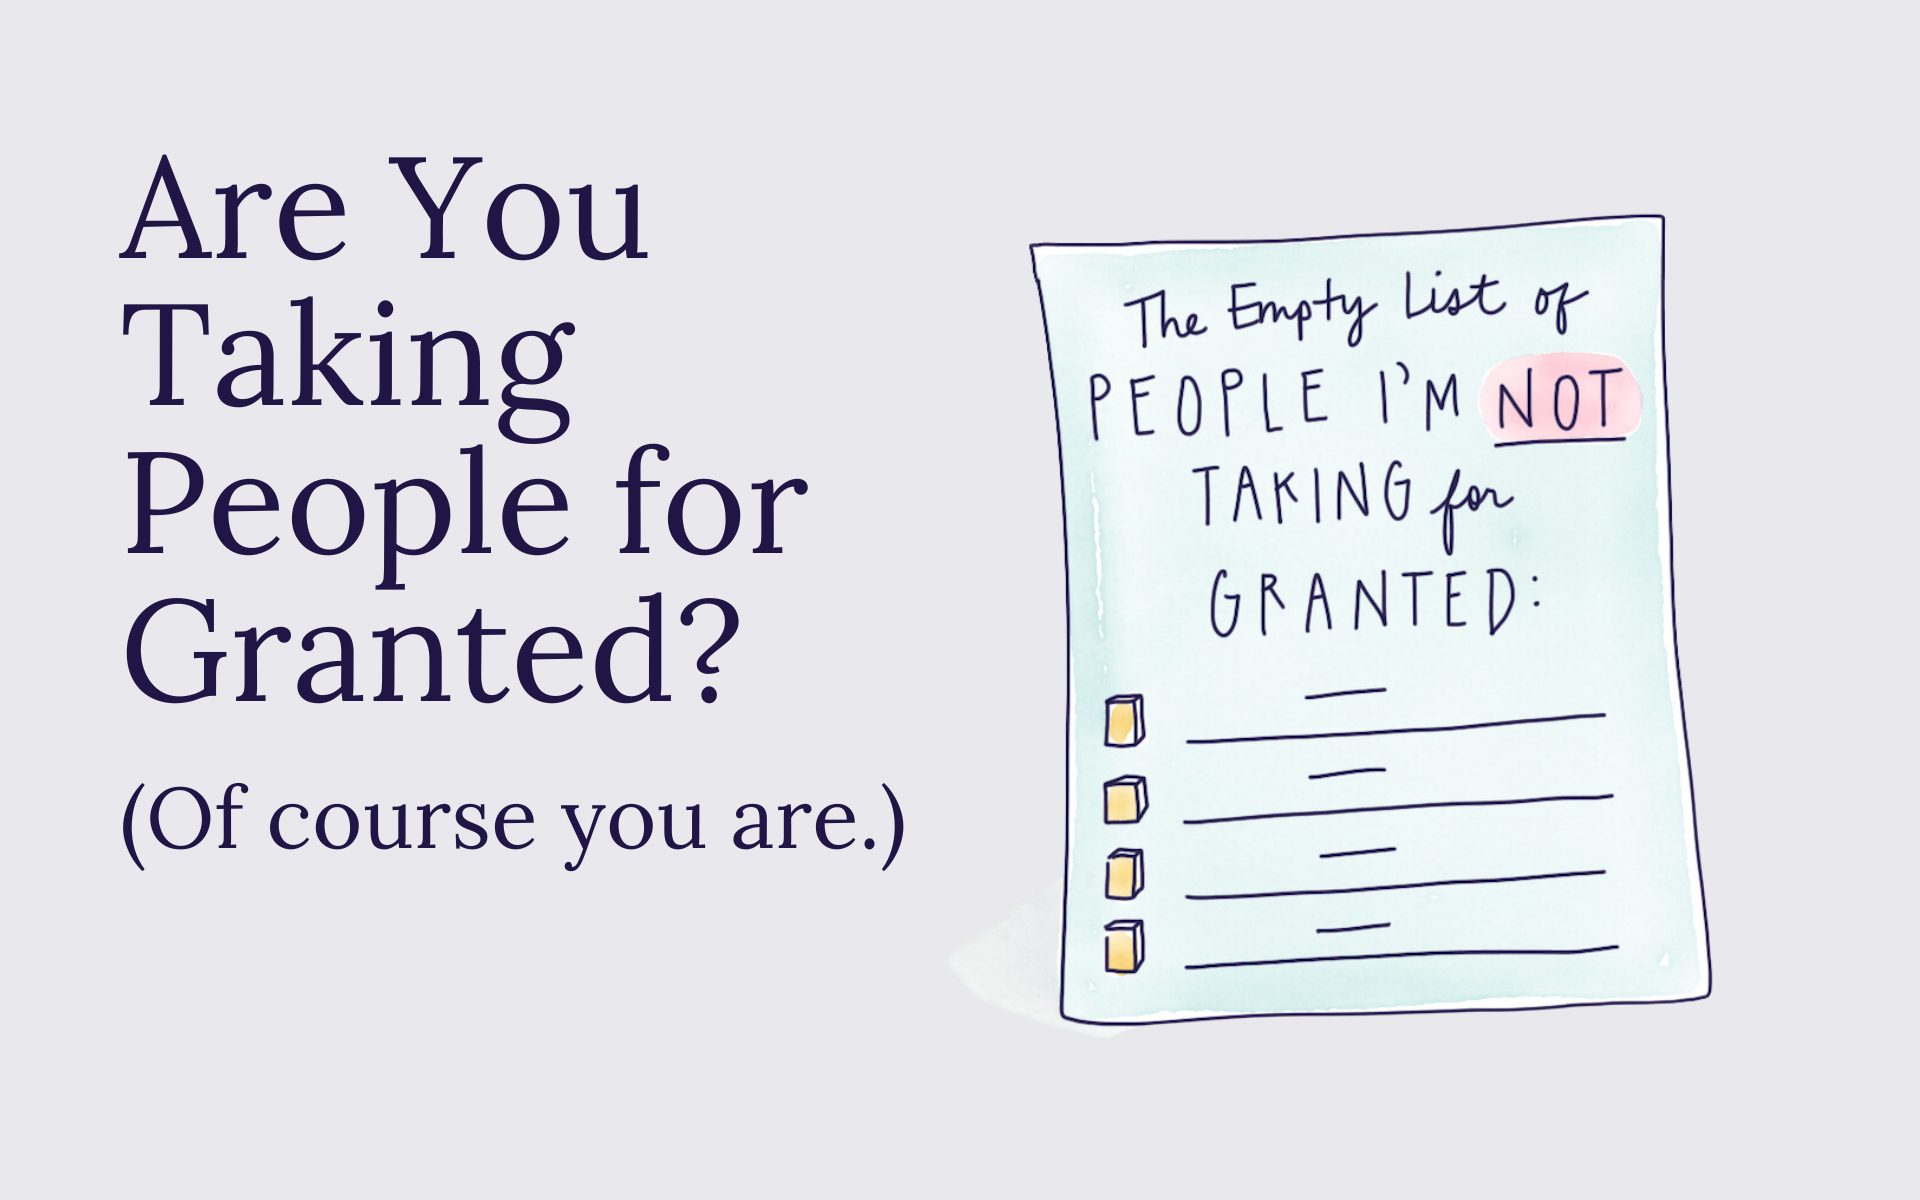 Are You Taking People for Granted?